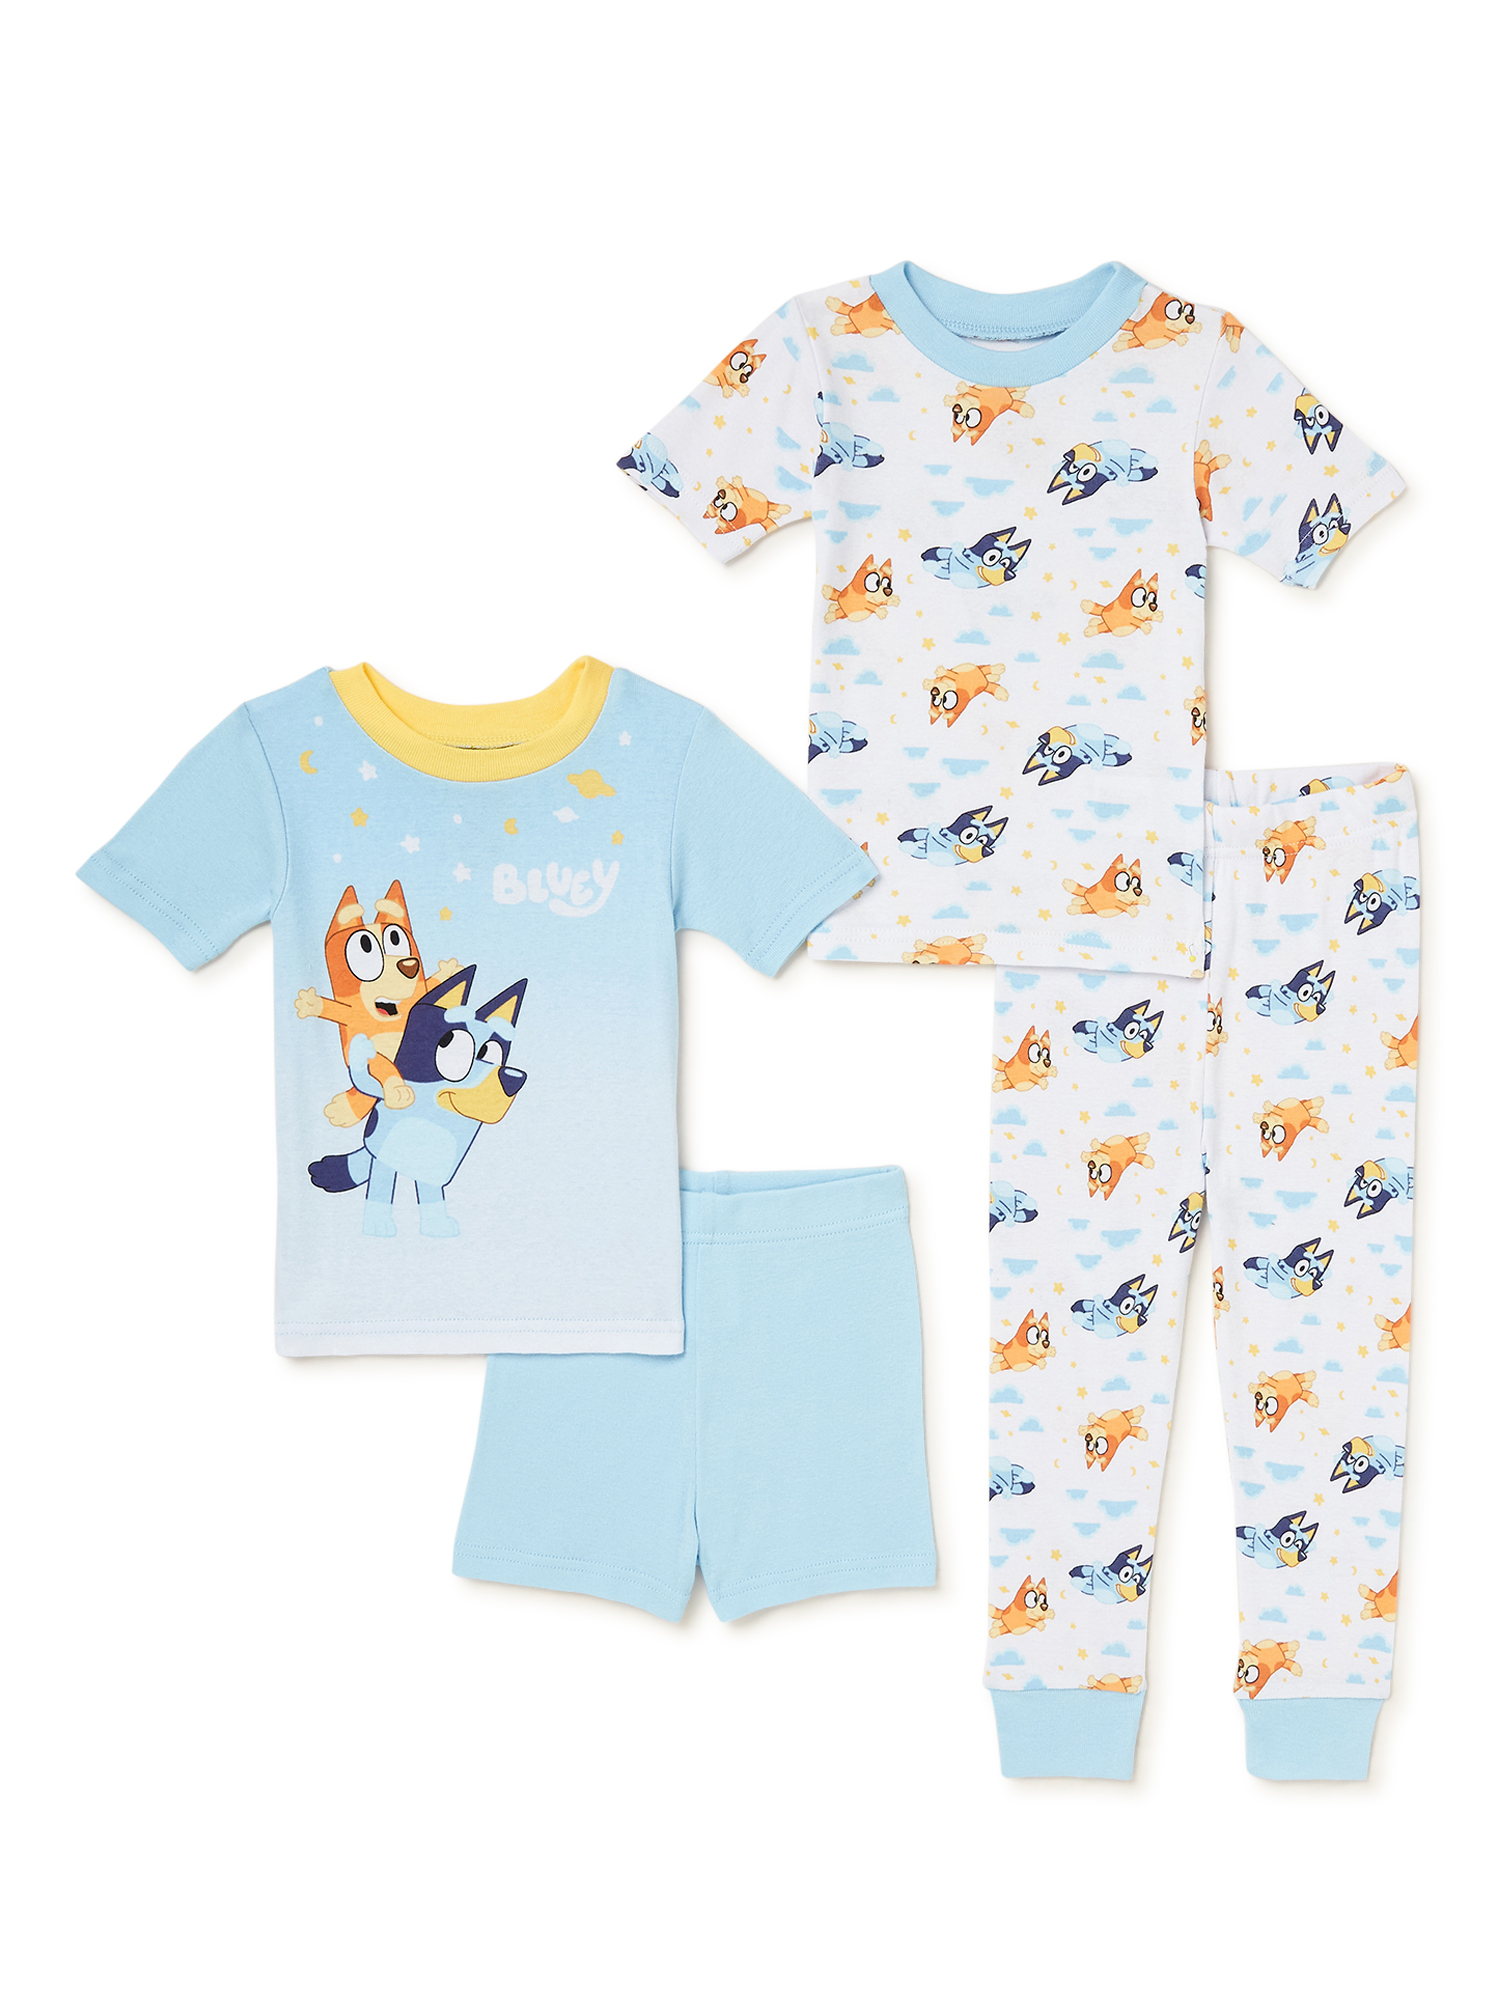 Toddler Character Pajama Set, 4-Piece, Sizes 12M-5T - image 1 of 4